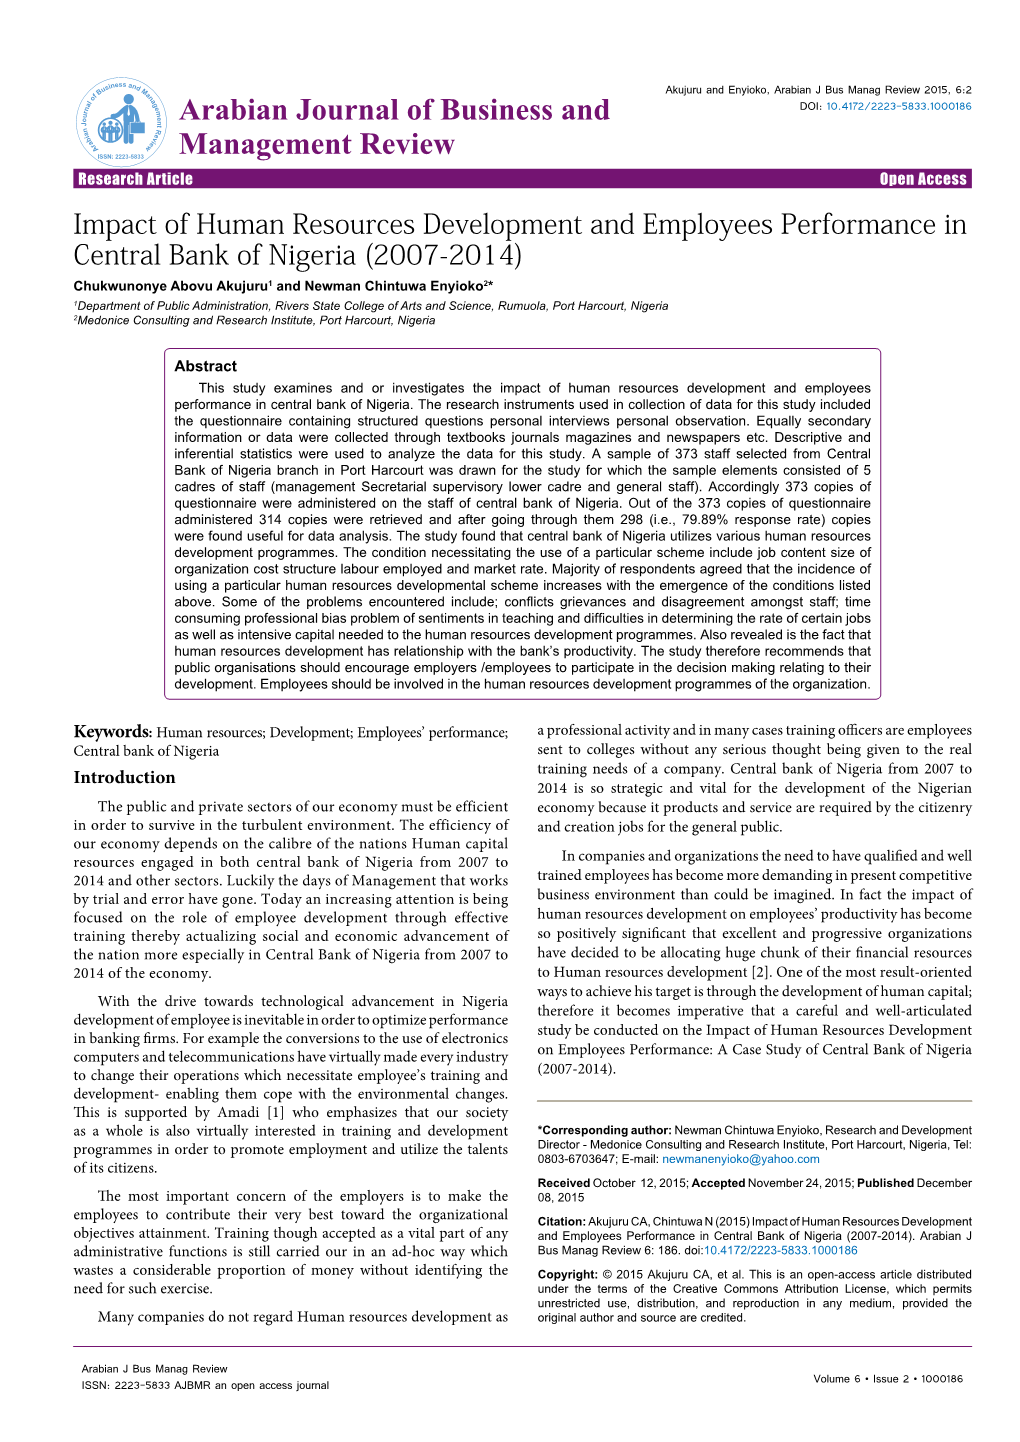 Impact of Human Resources Development and Employees Performance in Central Bank of Nigeria (2007-2014)